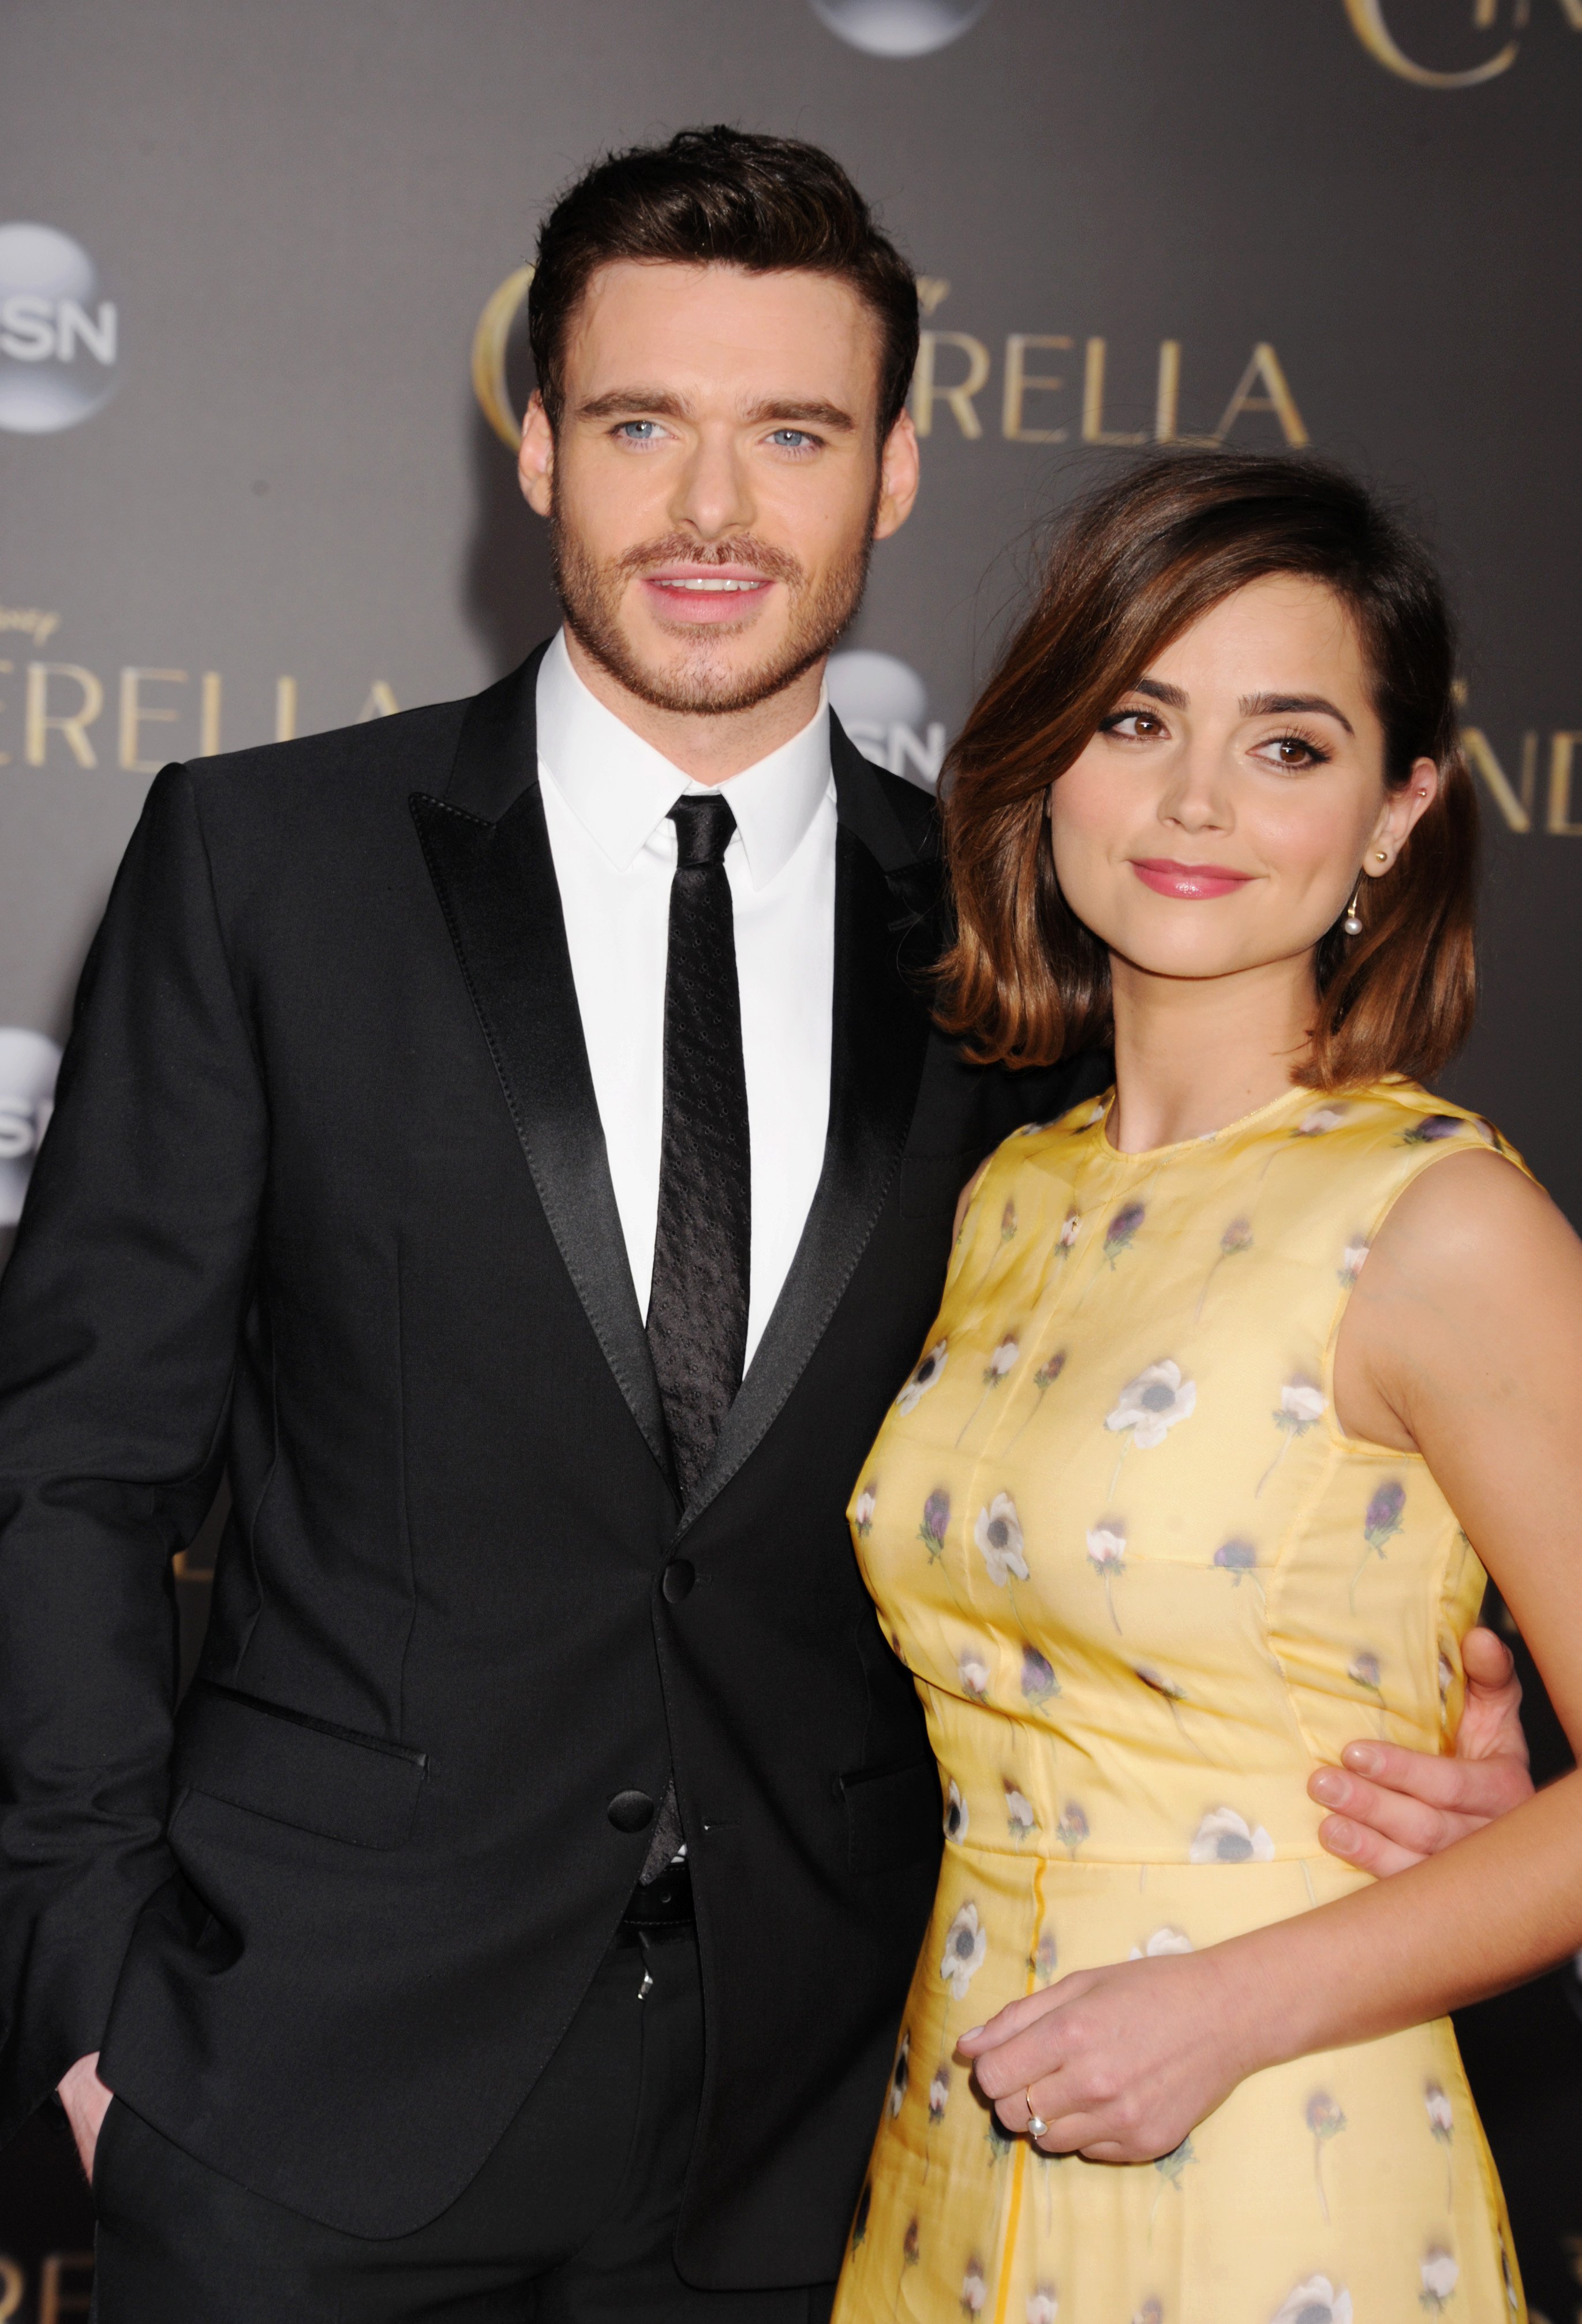 Richard Madden and Jenna Coleman at the World Premiere for "Cinderella" at the El Capitan Theatre in Hollywood, California on March 1, 2015 | Source: Getty Images